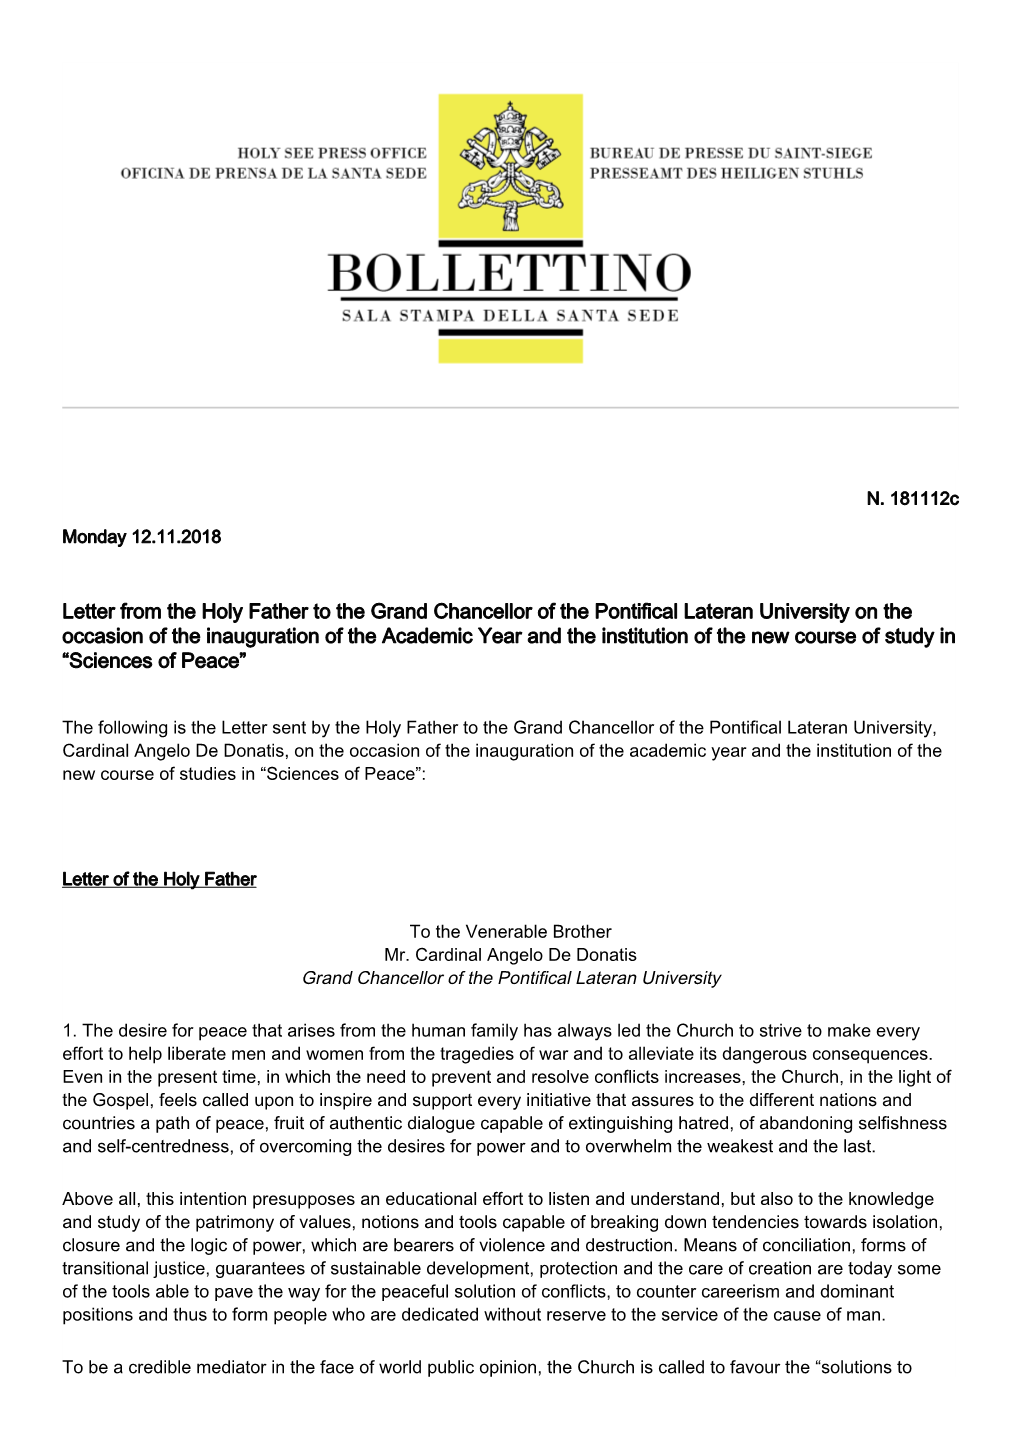 Letter from the Holy Father to the Grand Chancellor of the Pontifical